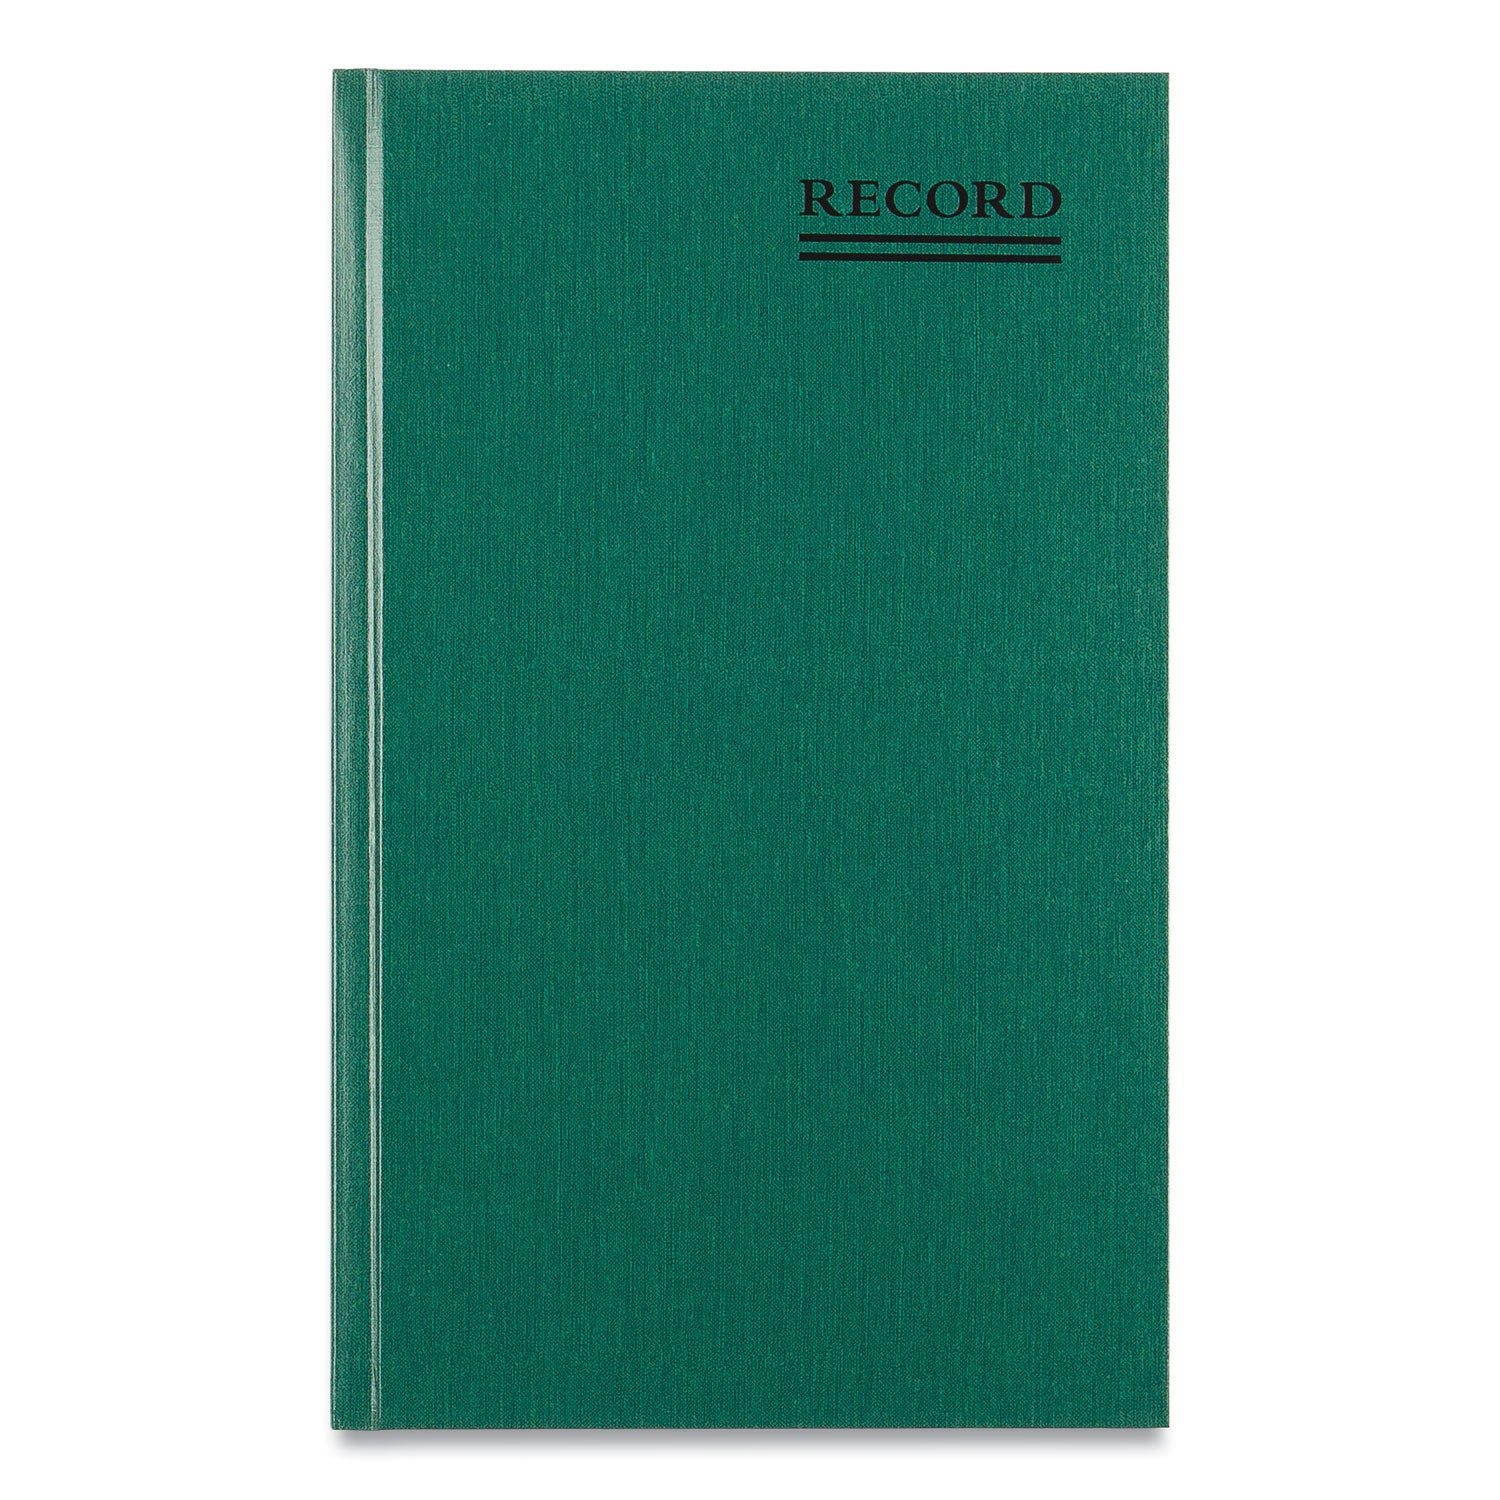 Emerald Series Account Book, Green Cover, 12.25 x 7.25 Sheets, 500 Sheets/Book - 